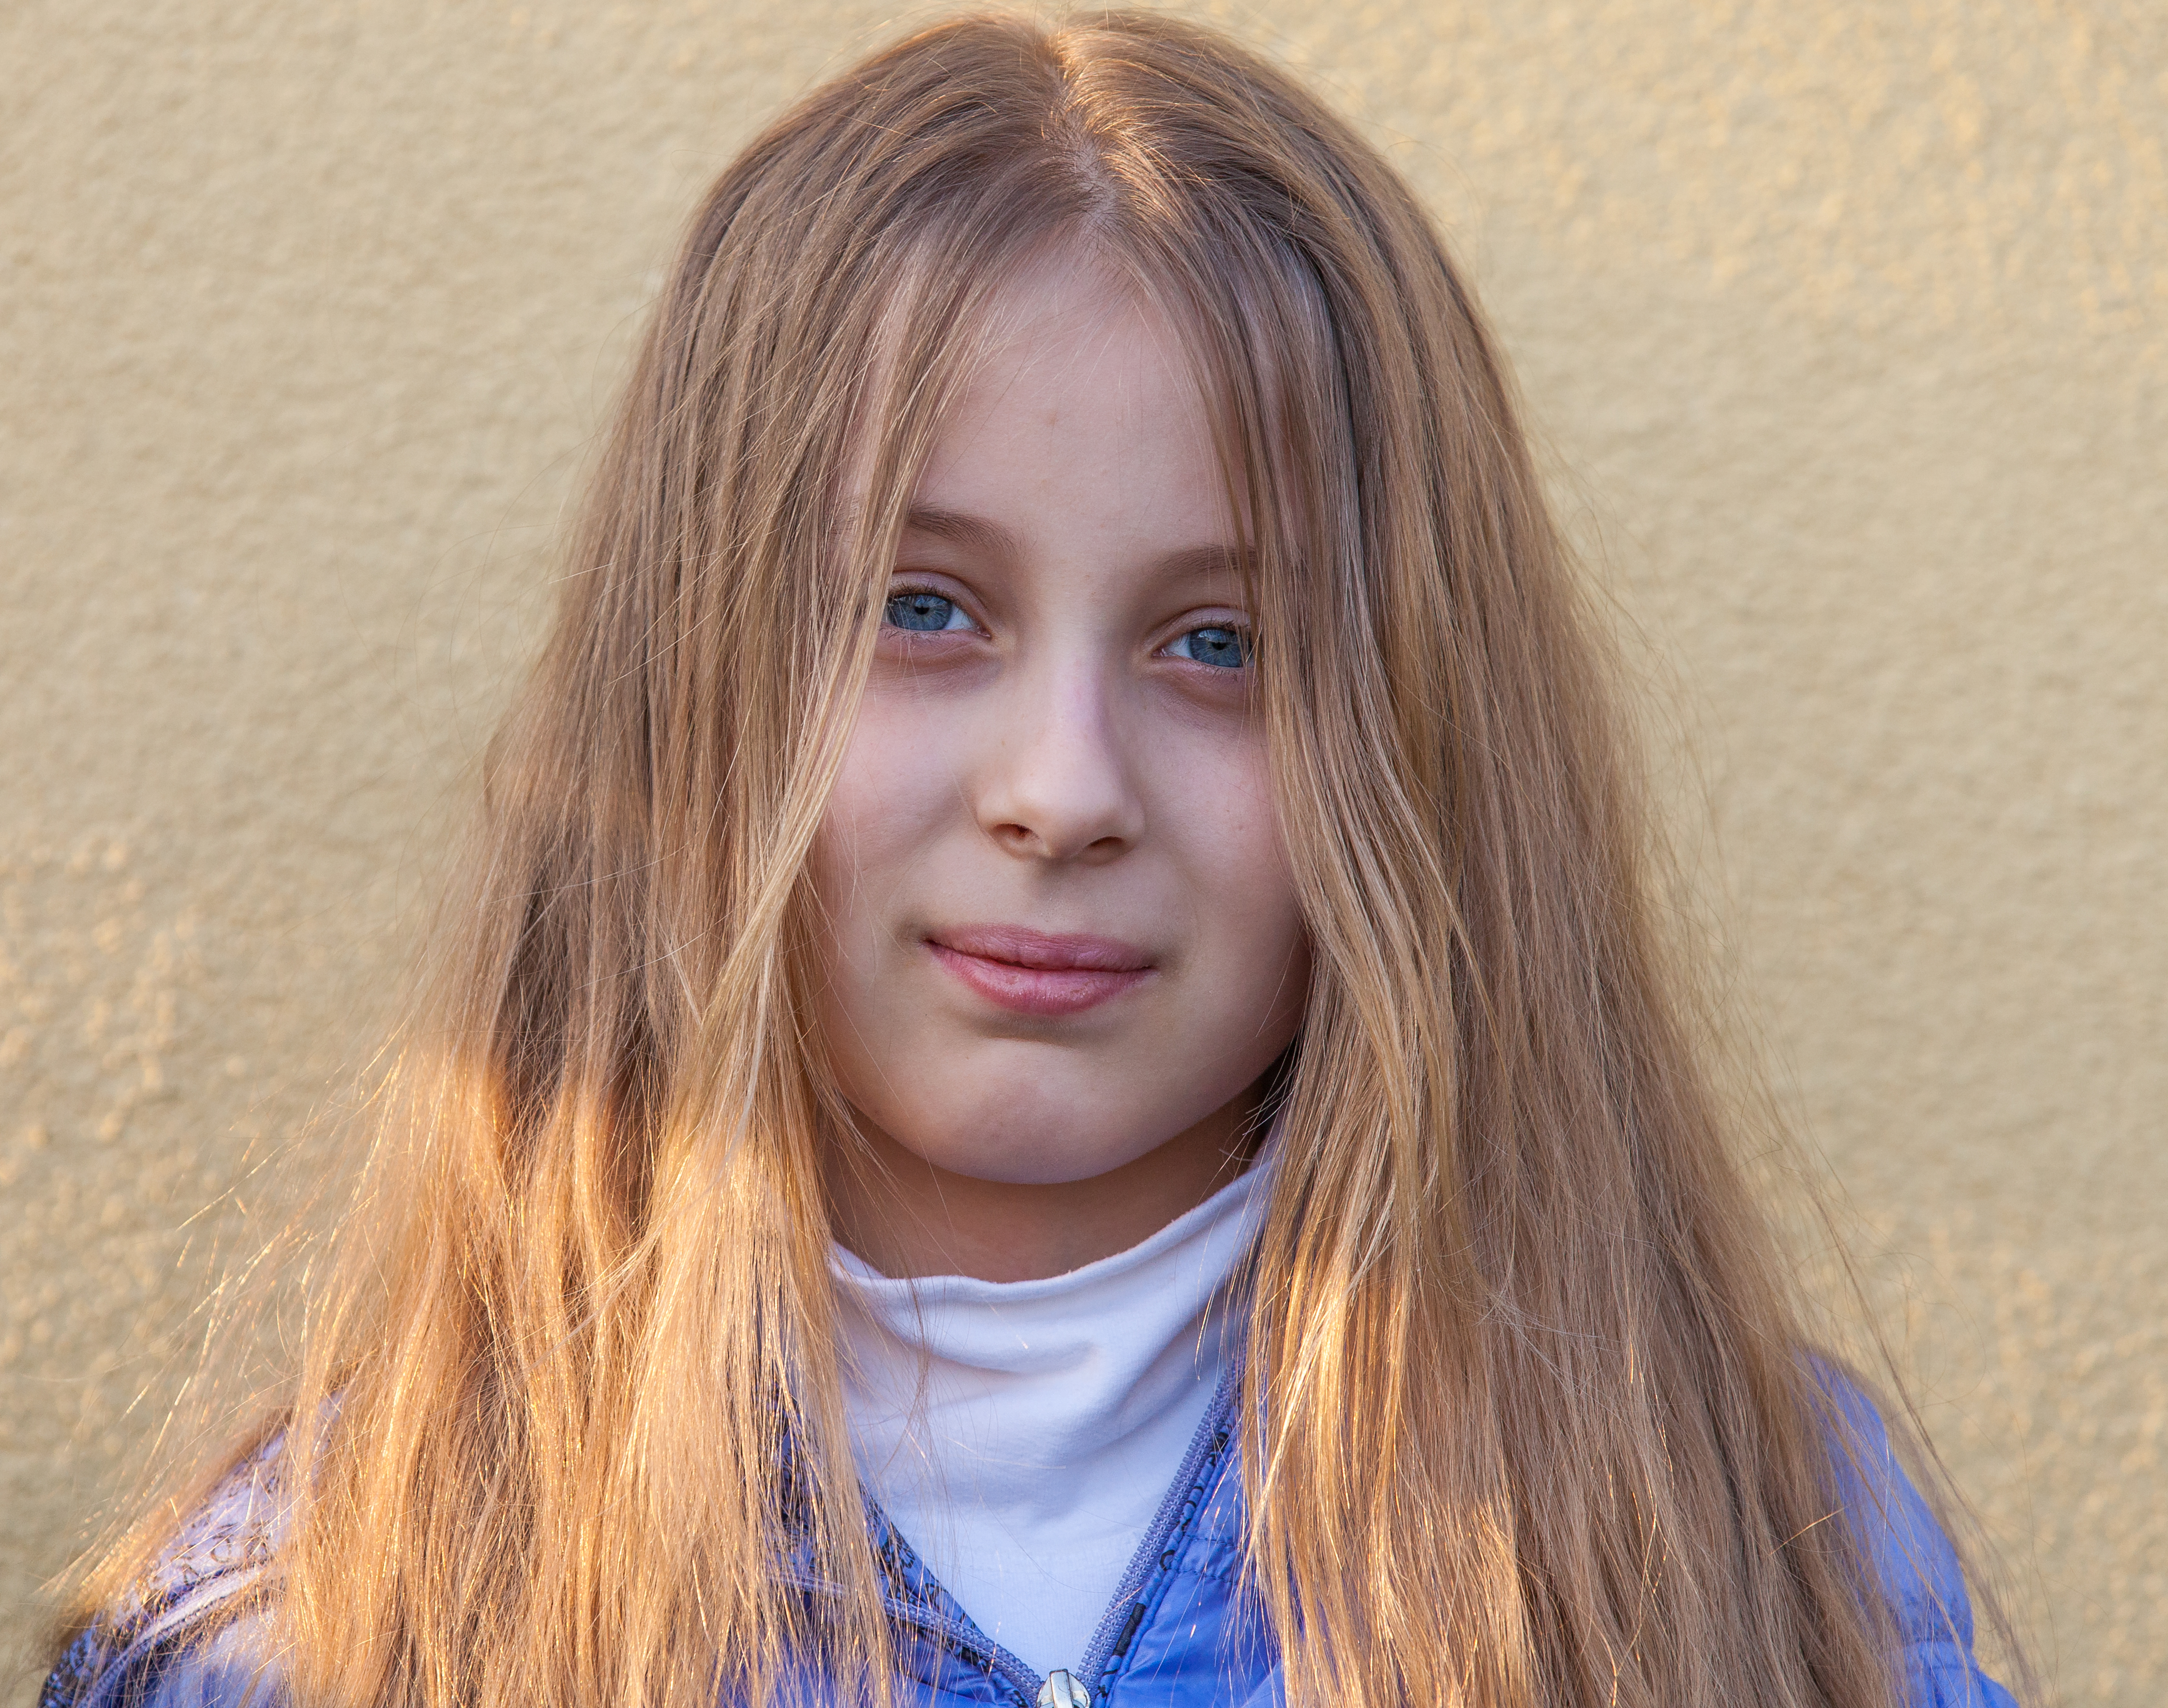 a blond long-haired Roman-Catholic girl photographed in April 2014, portrait 4 out of 11